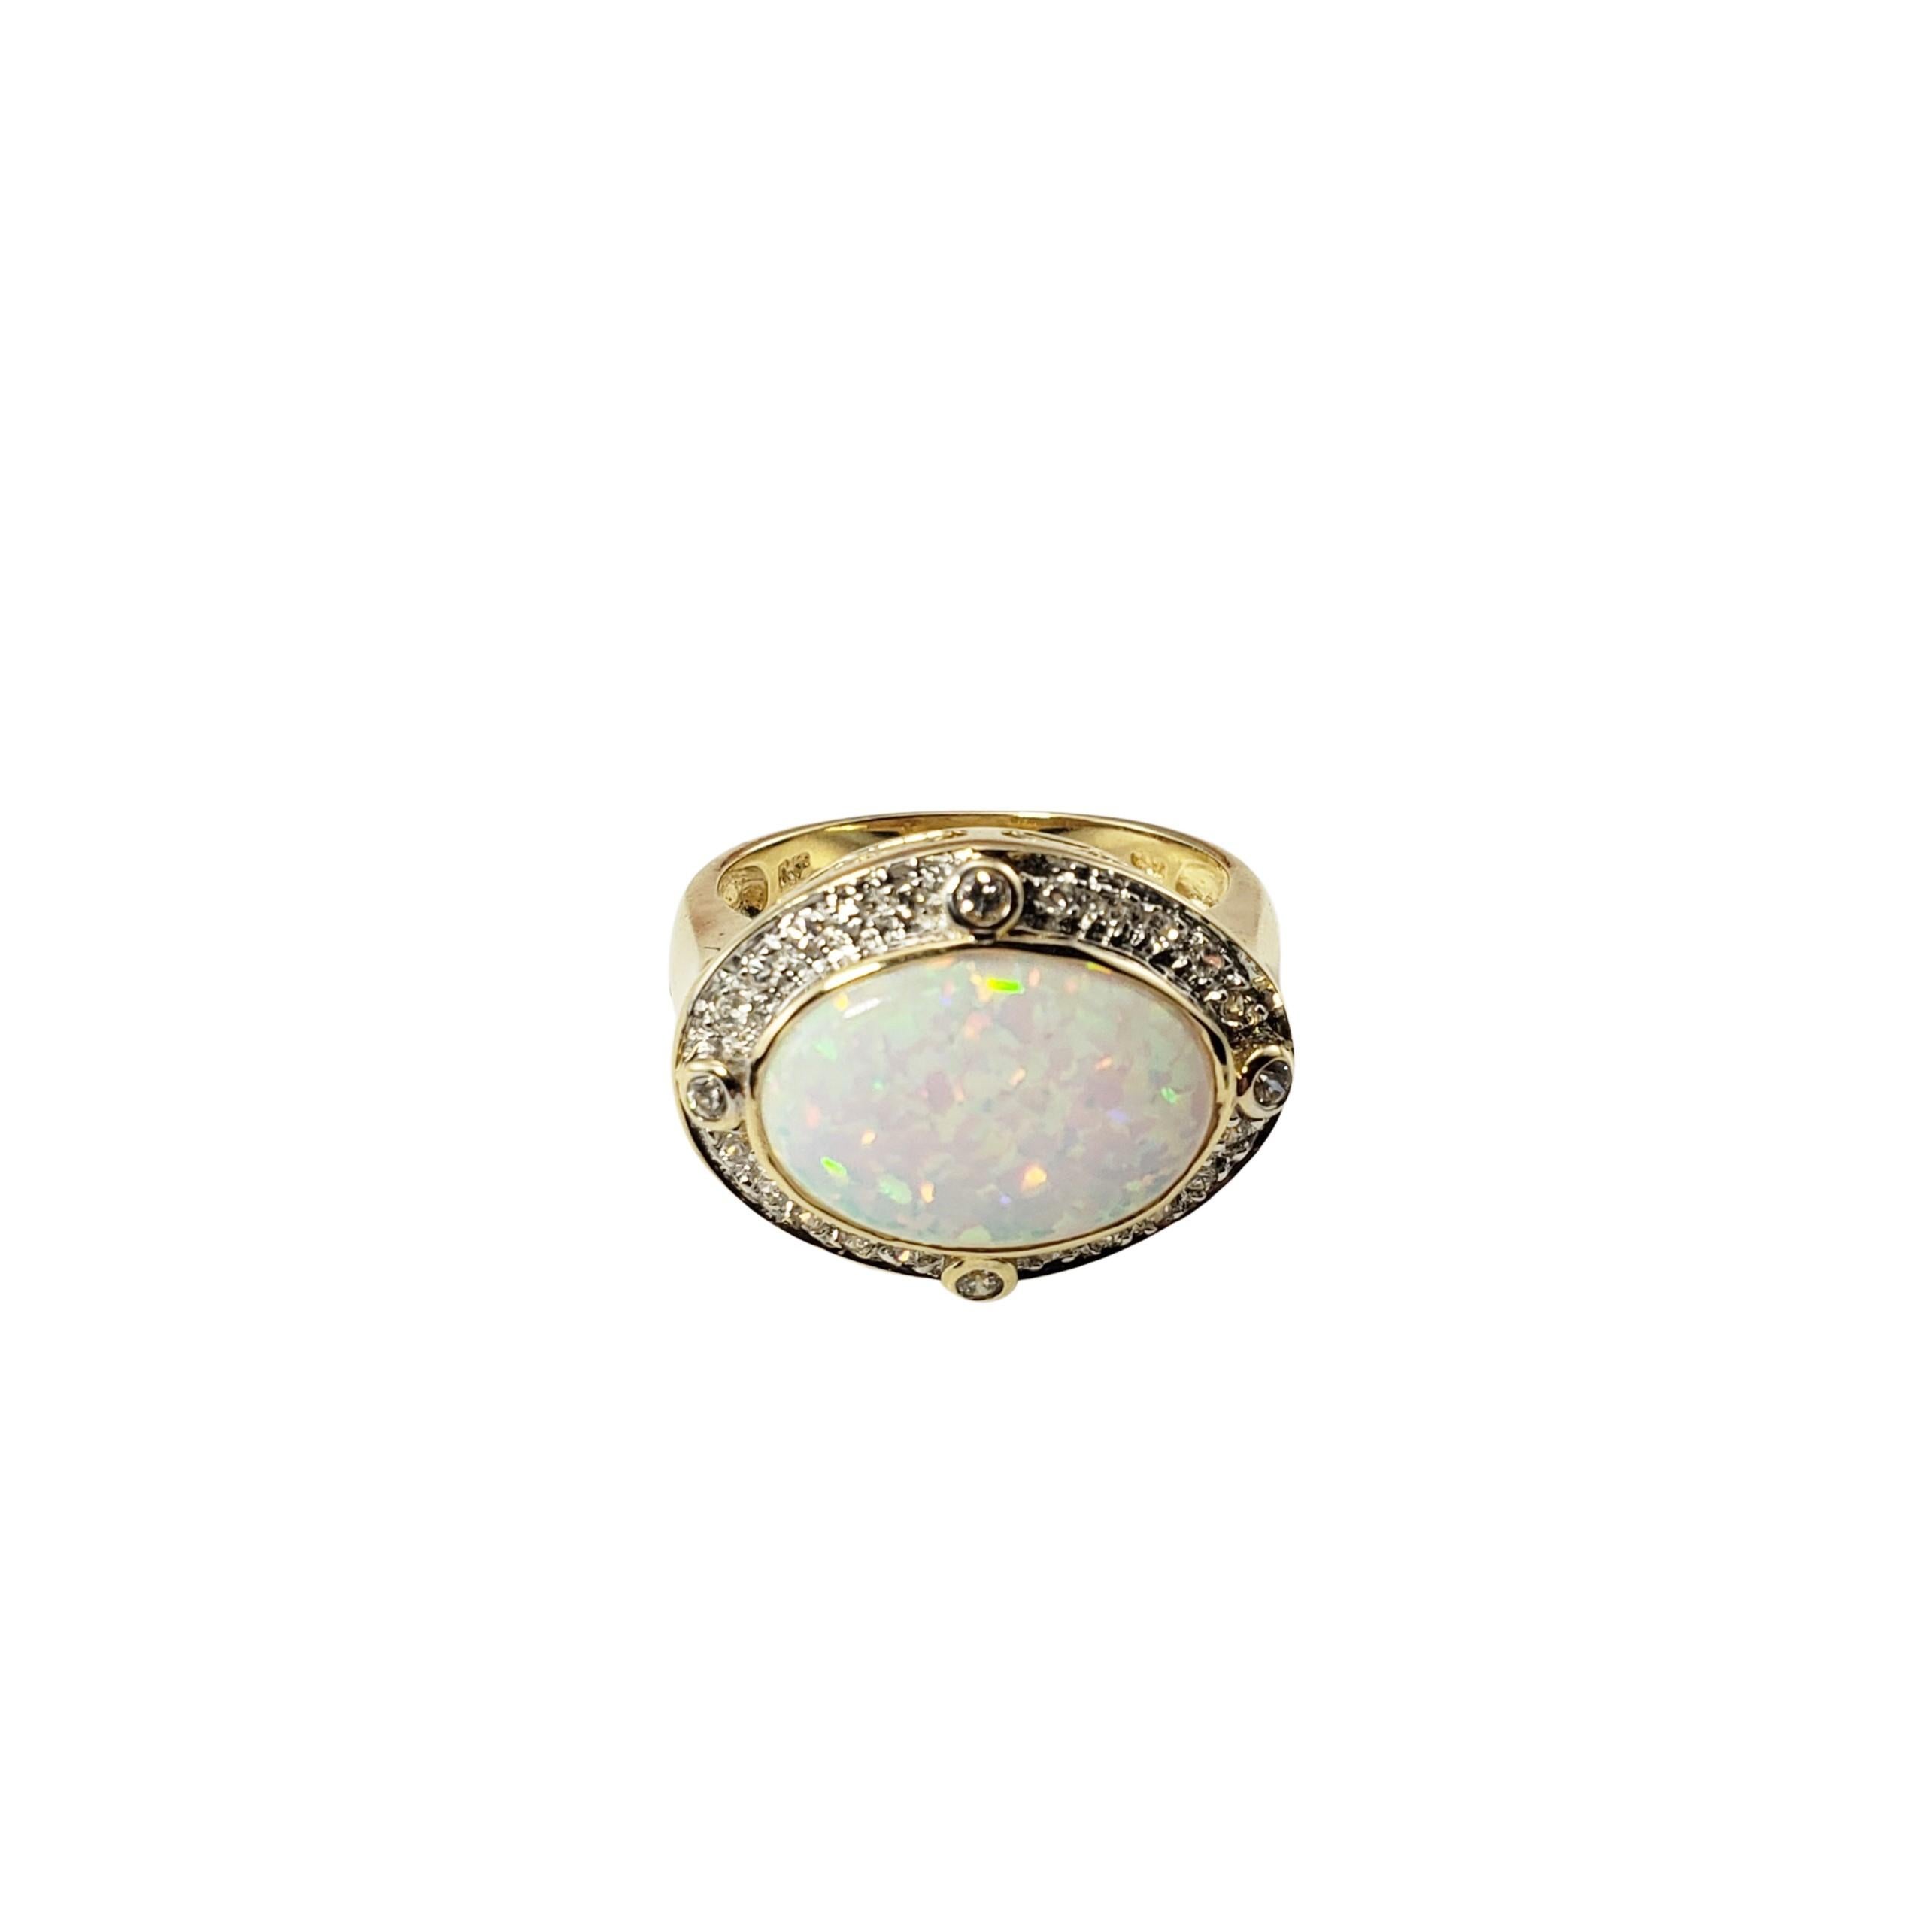 Vintage 14 Karat Yellow Gold Opal and Diamond Ring Size 7-

This lovely ring features one oval opal (15 mm x 10 mm), four round brilliant cut diamonds (.08 TCW) and 20 round single cut diamonds (.15 TCW) set in classic 14K yellow gold.  Top of ring